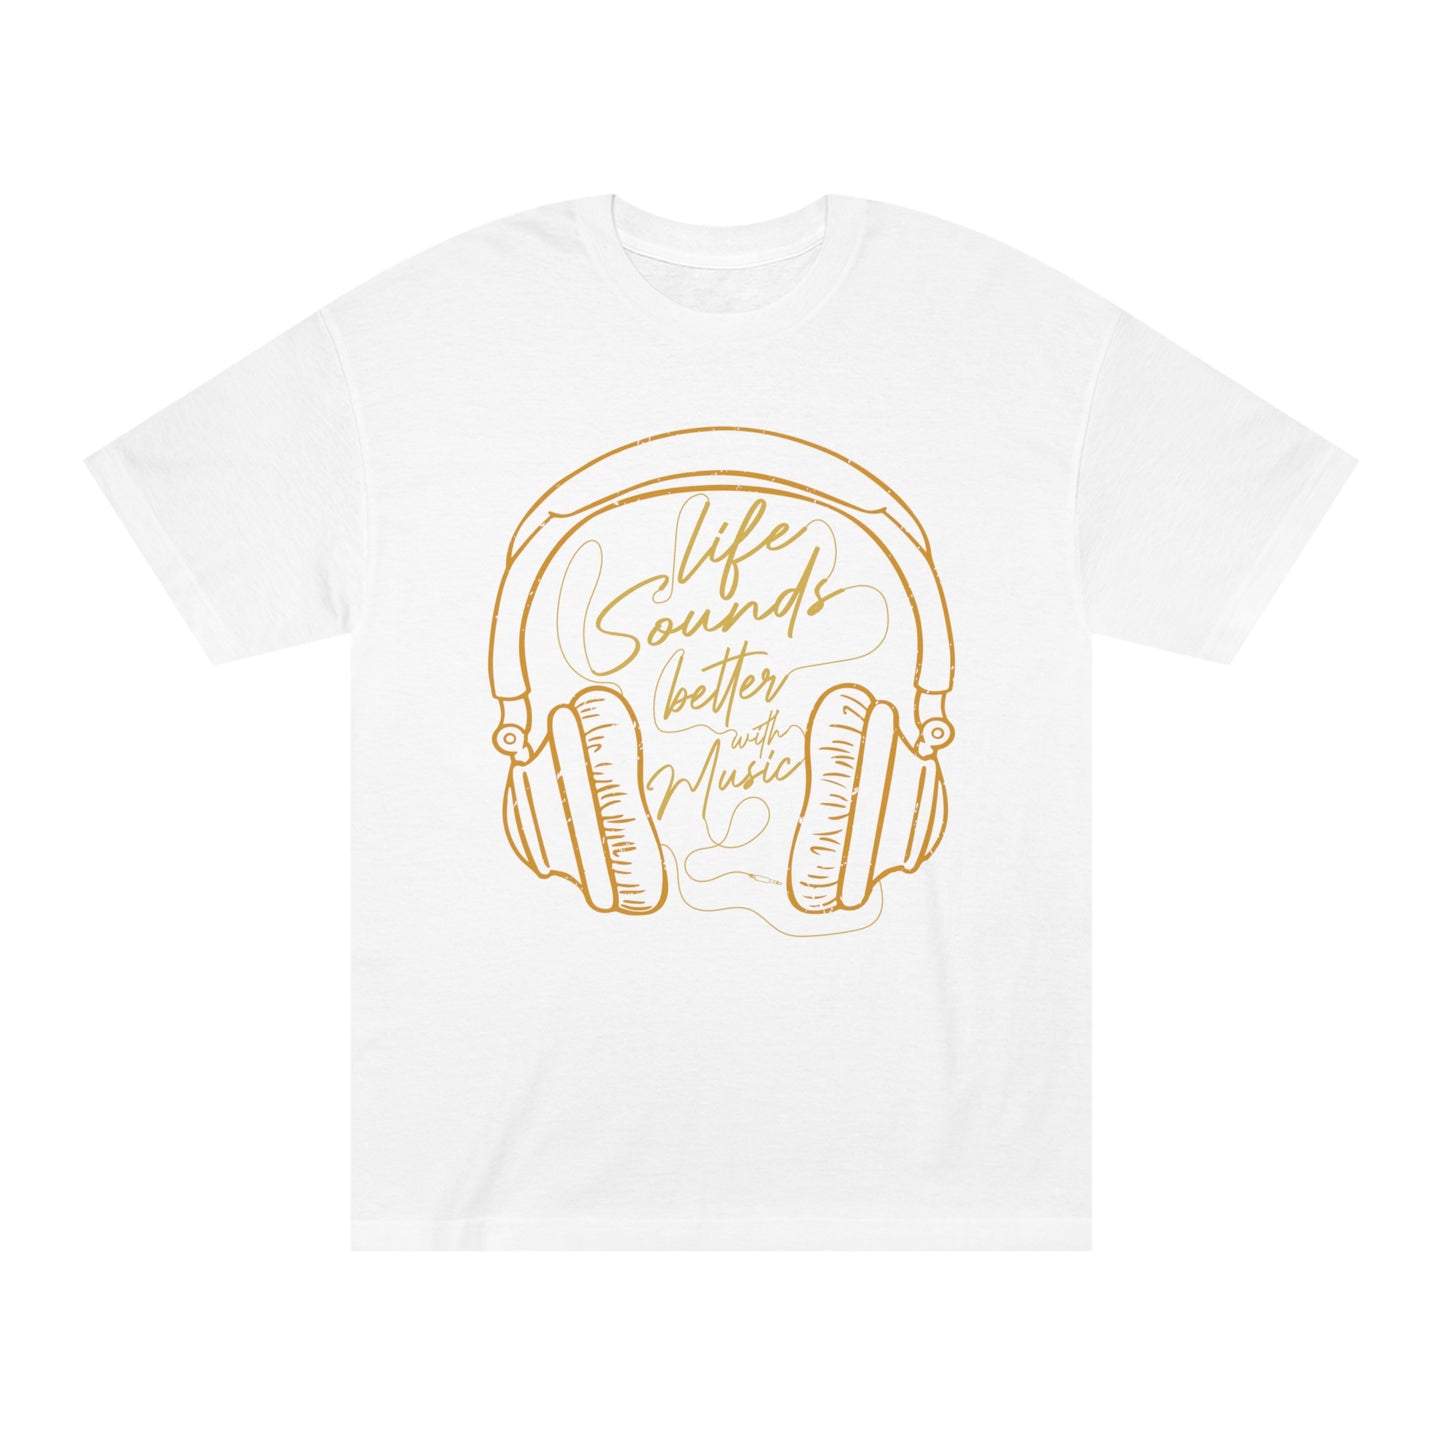 Life sound better with music Unisex Classic Tee